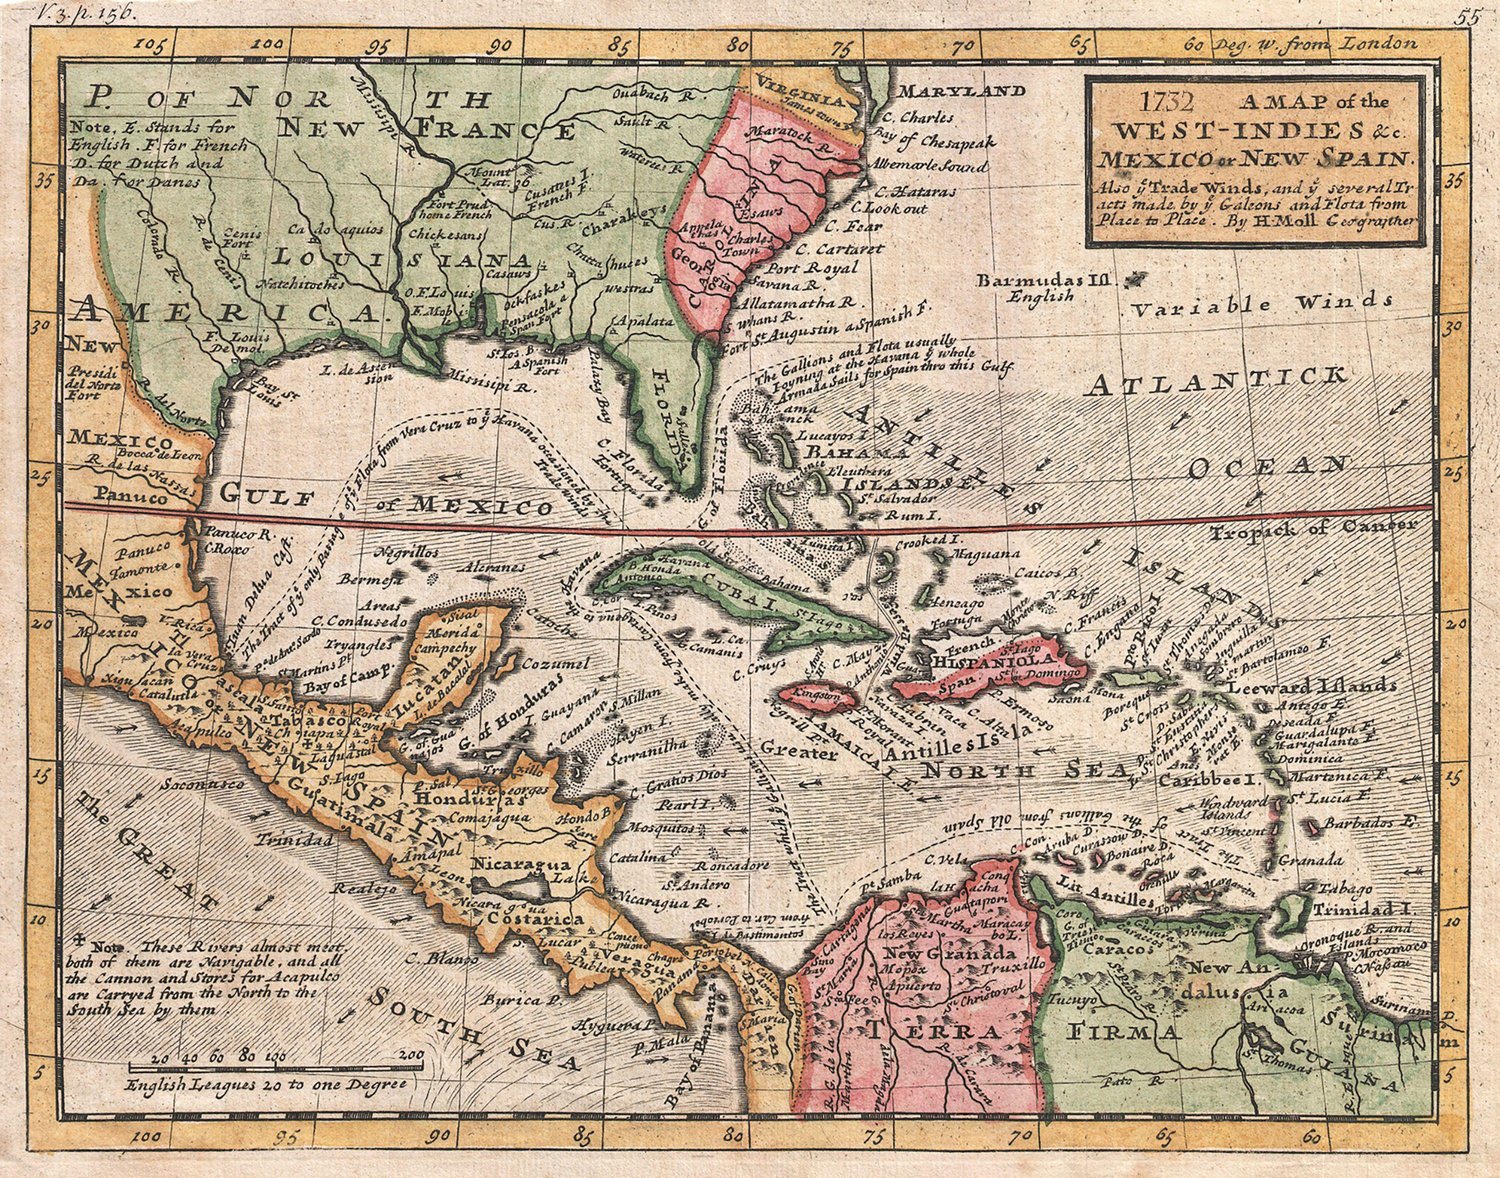 1732 A Map of West Indies and Mexico or New Spain. Map created by HermanMoll. 18"x24" matte paper